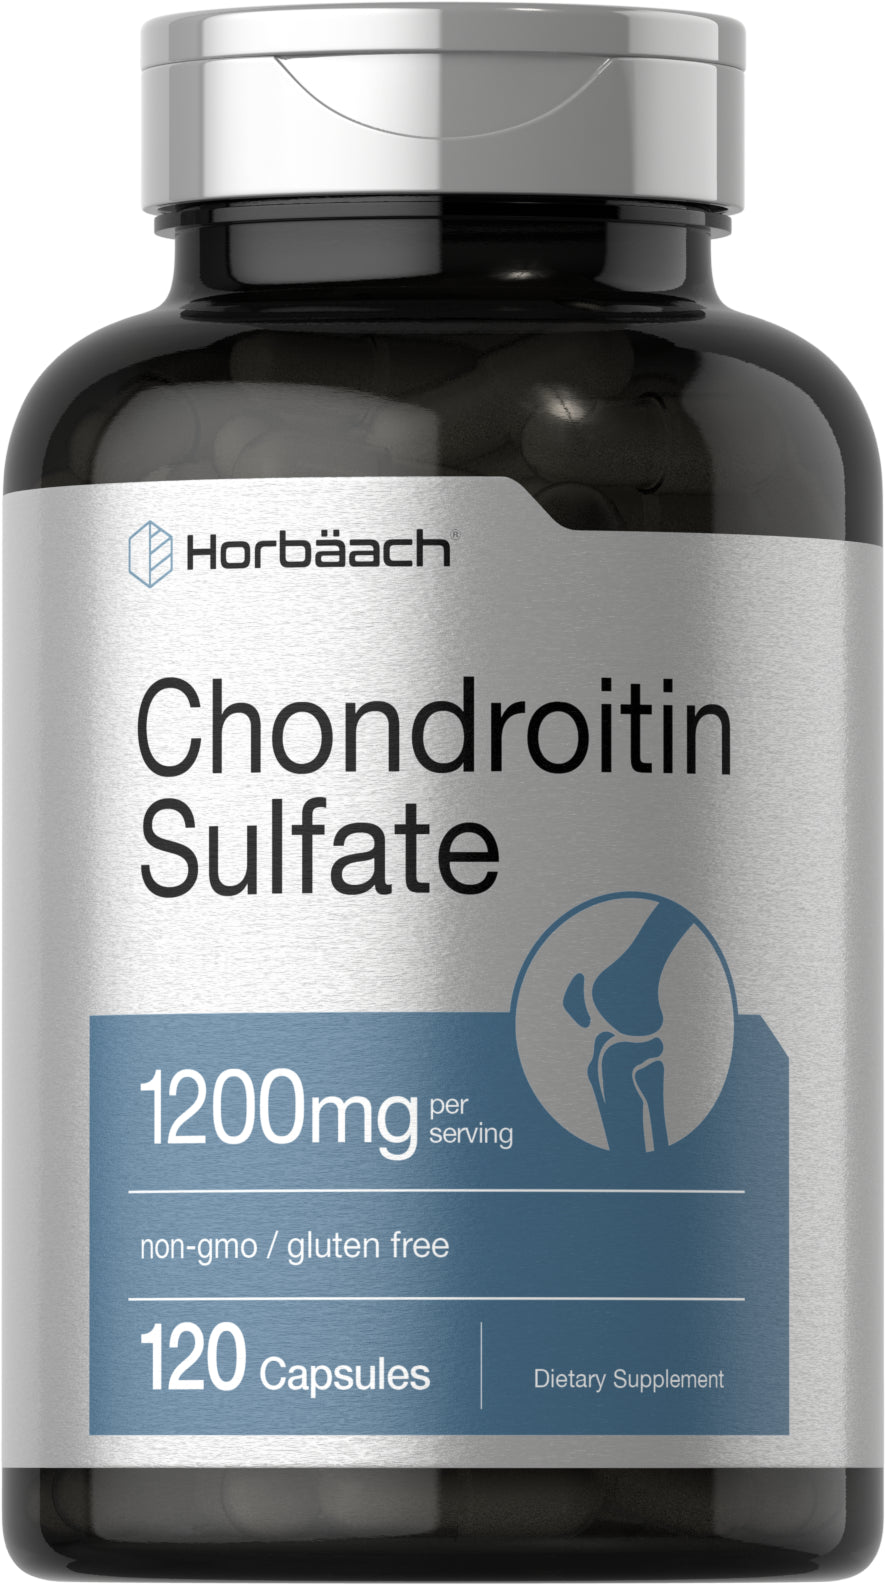 Chondroitin Sulfate 1200Mg | 120 Capsules | Non-Gmo & Gluten Free Supplement | by Horbaach